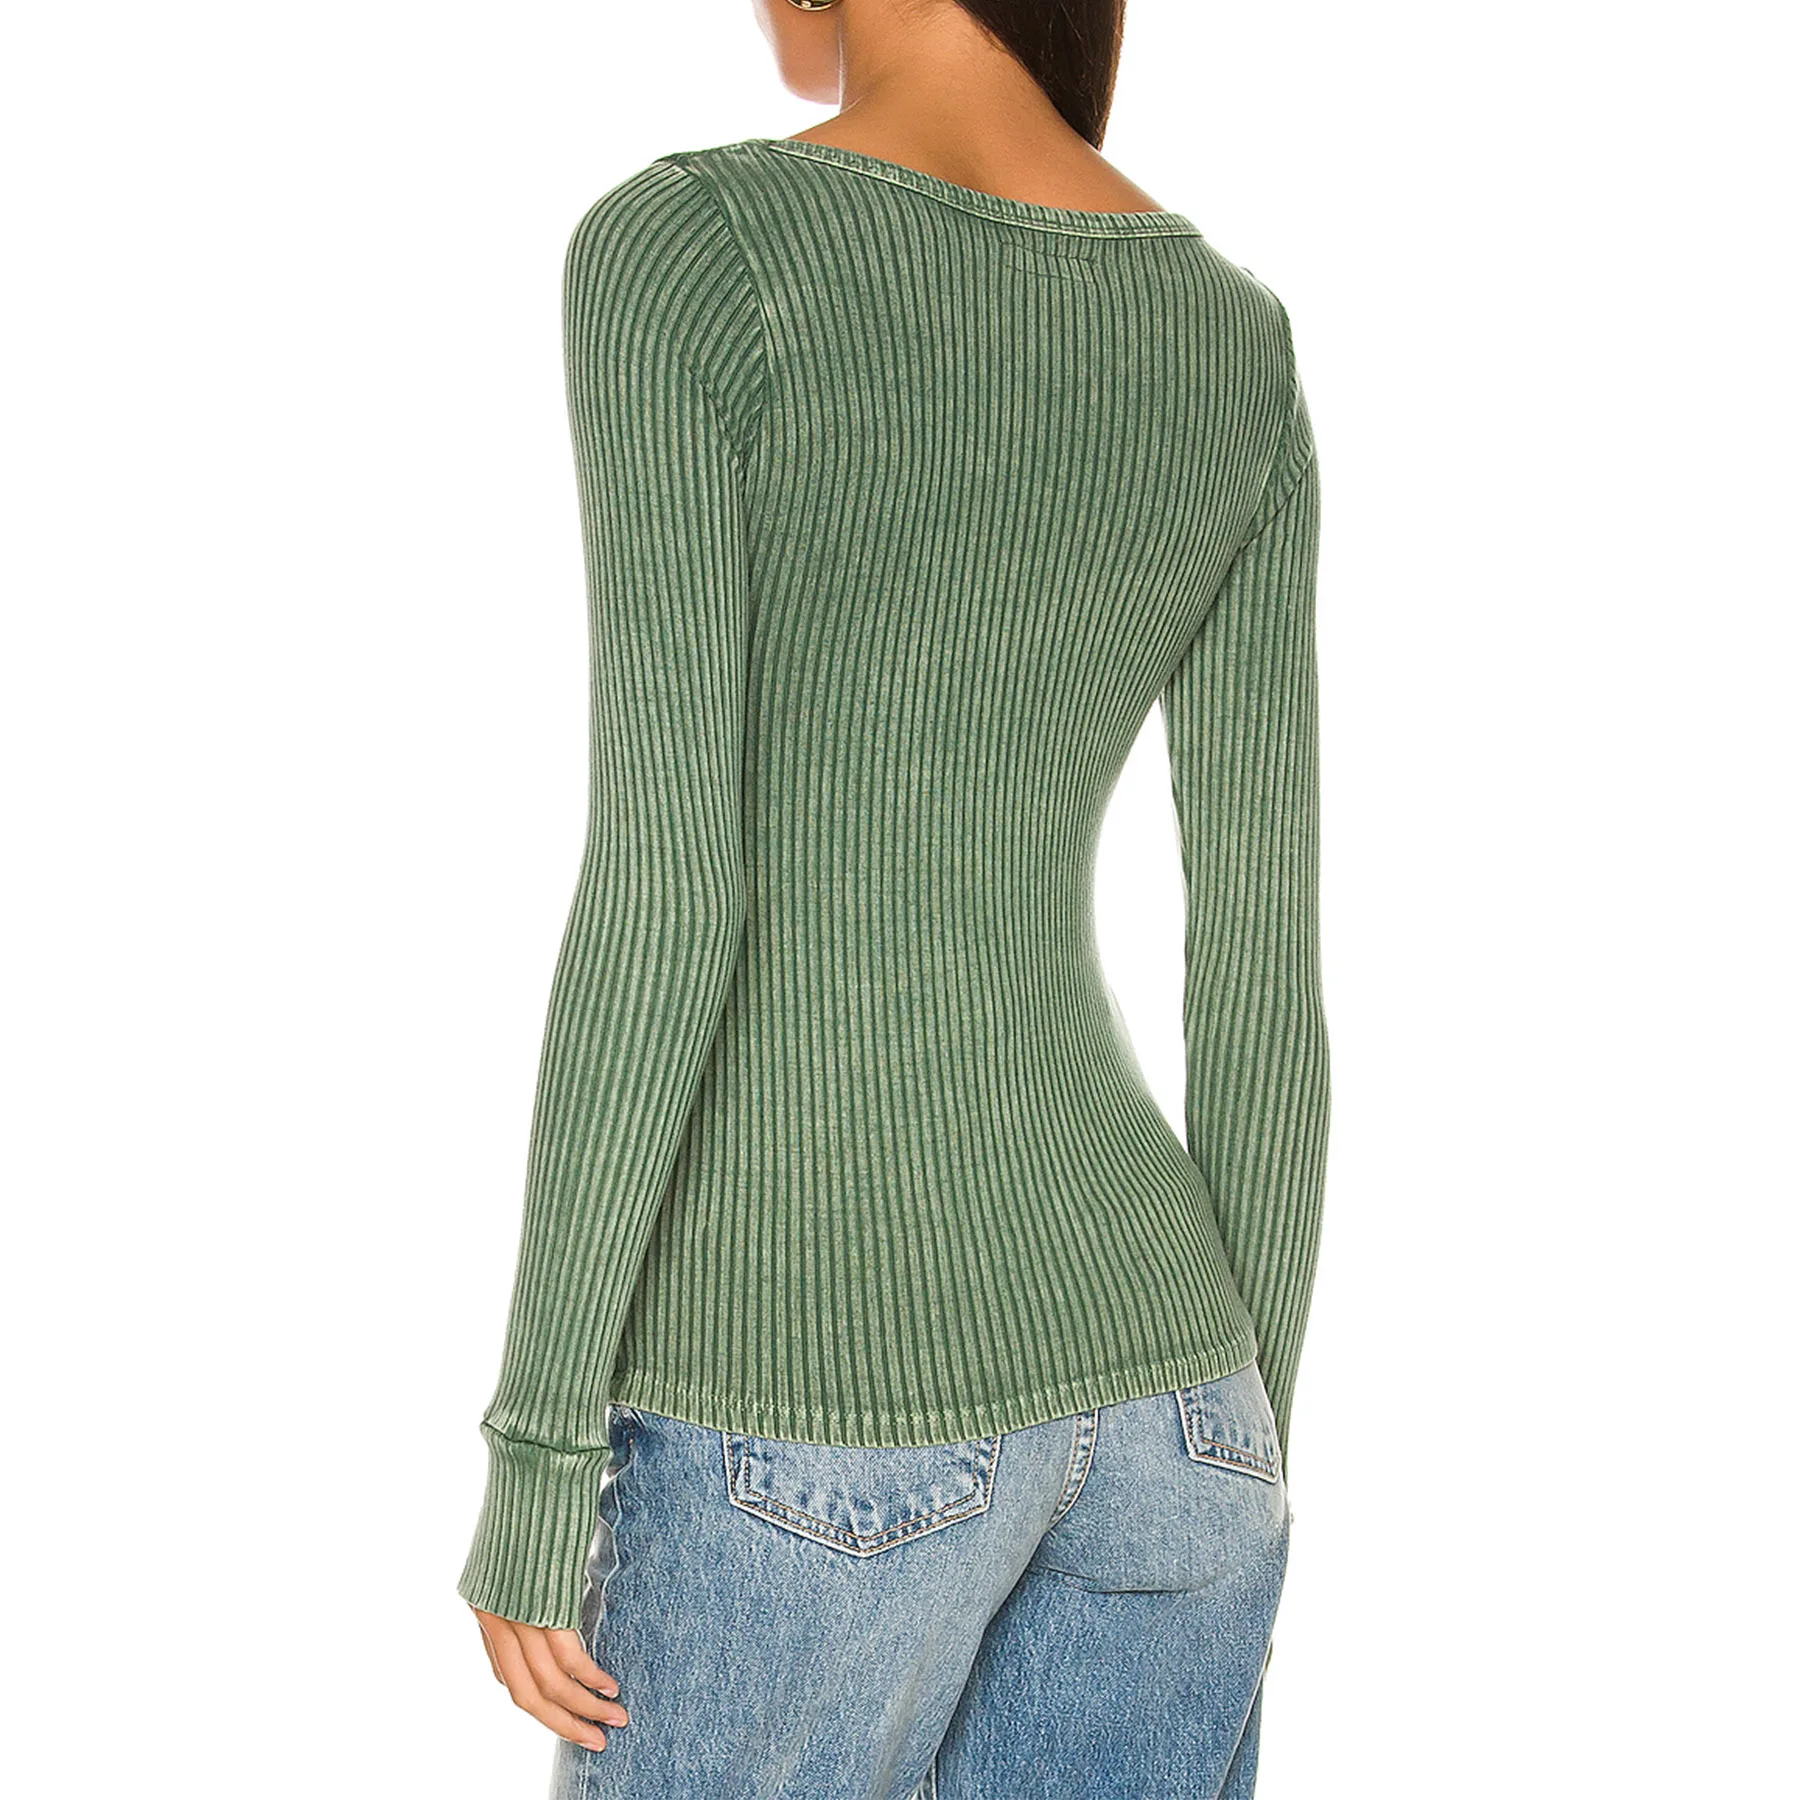 New Collections Simple Plain Color Jersey Crew Neck Long Sleeve Tops Casual Slim Knitted Rib Bodysuit